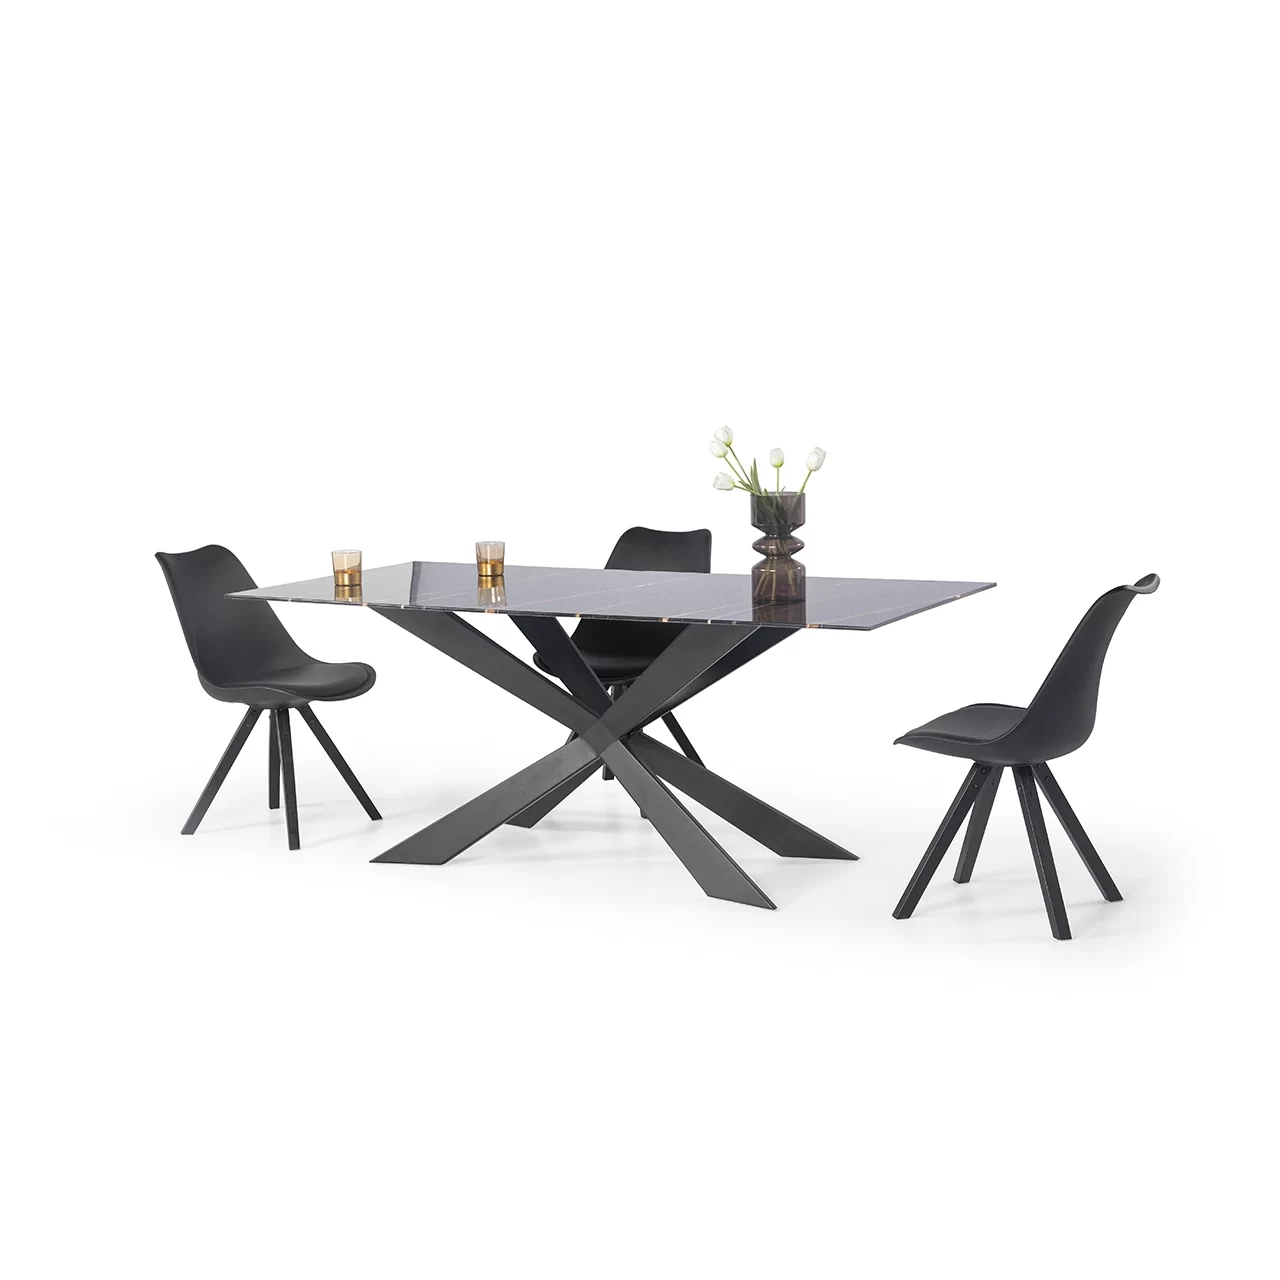 a glass black table with its legs forming an x surrounded by three black chairs and on top of the table are two glasses and a vase